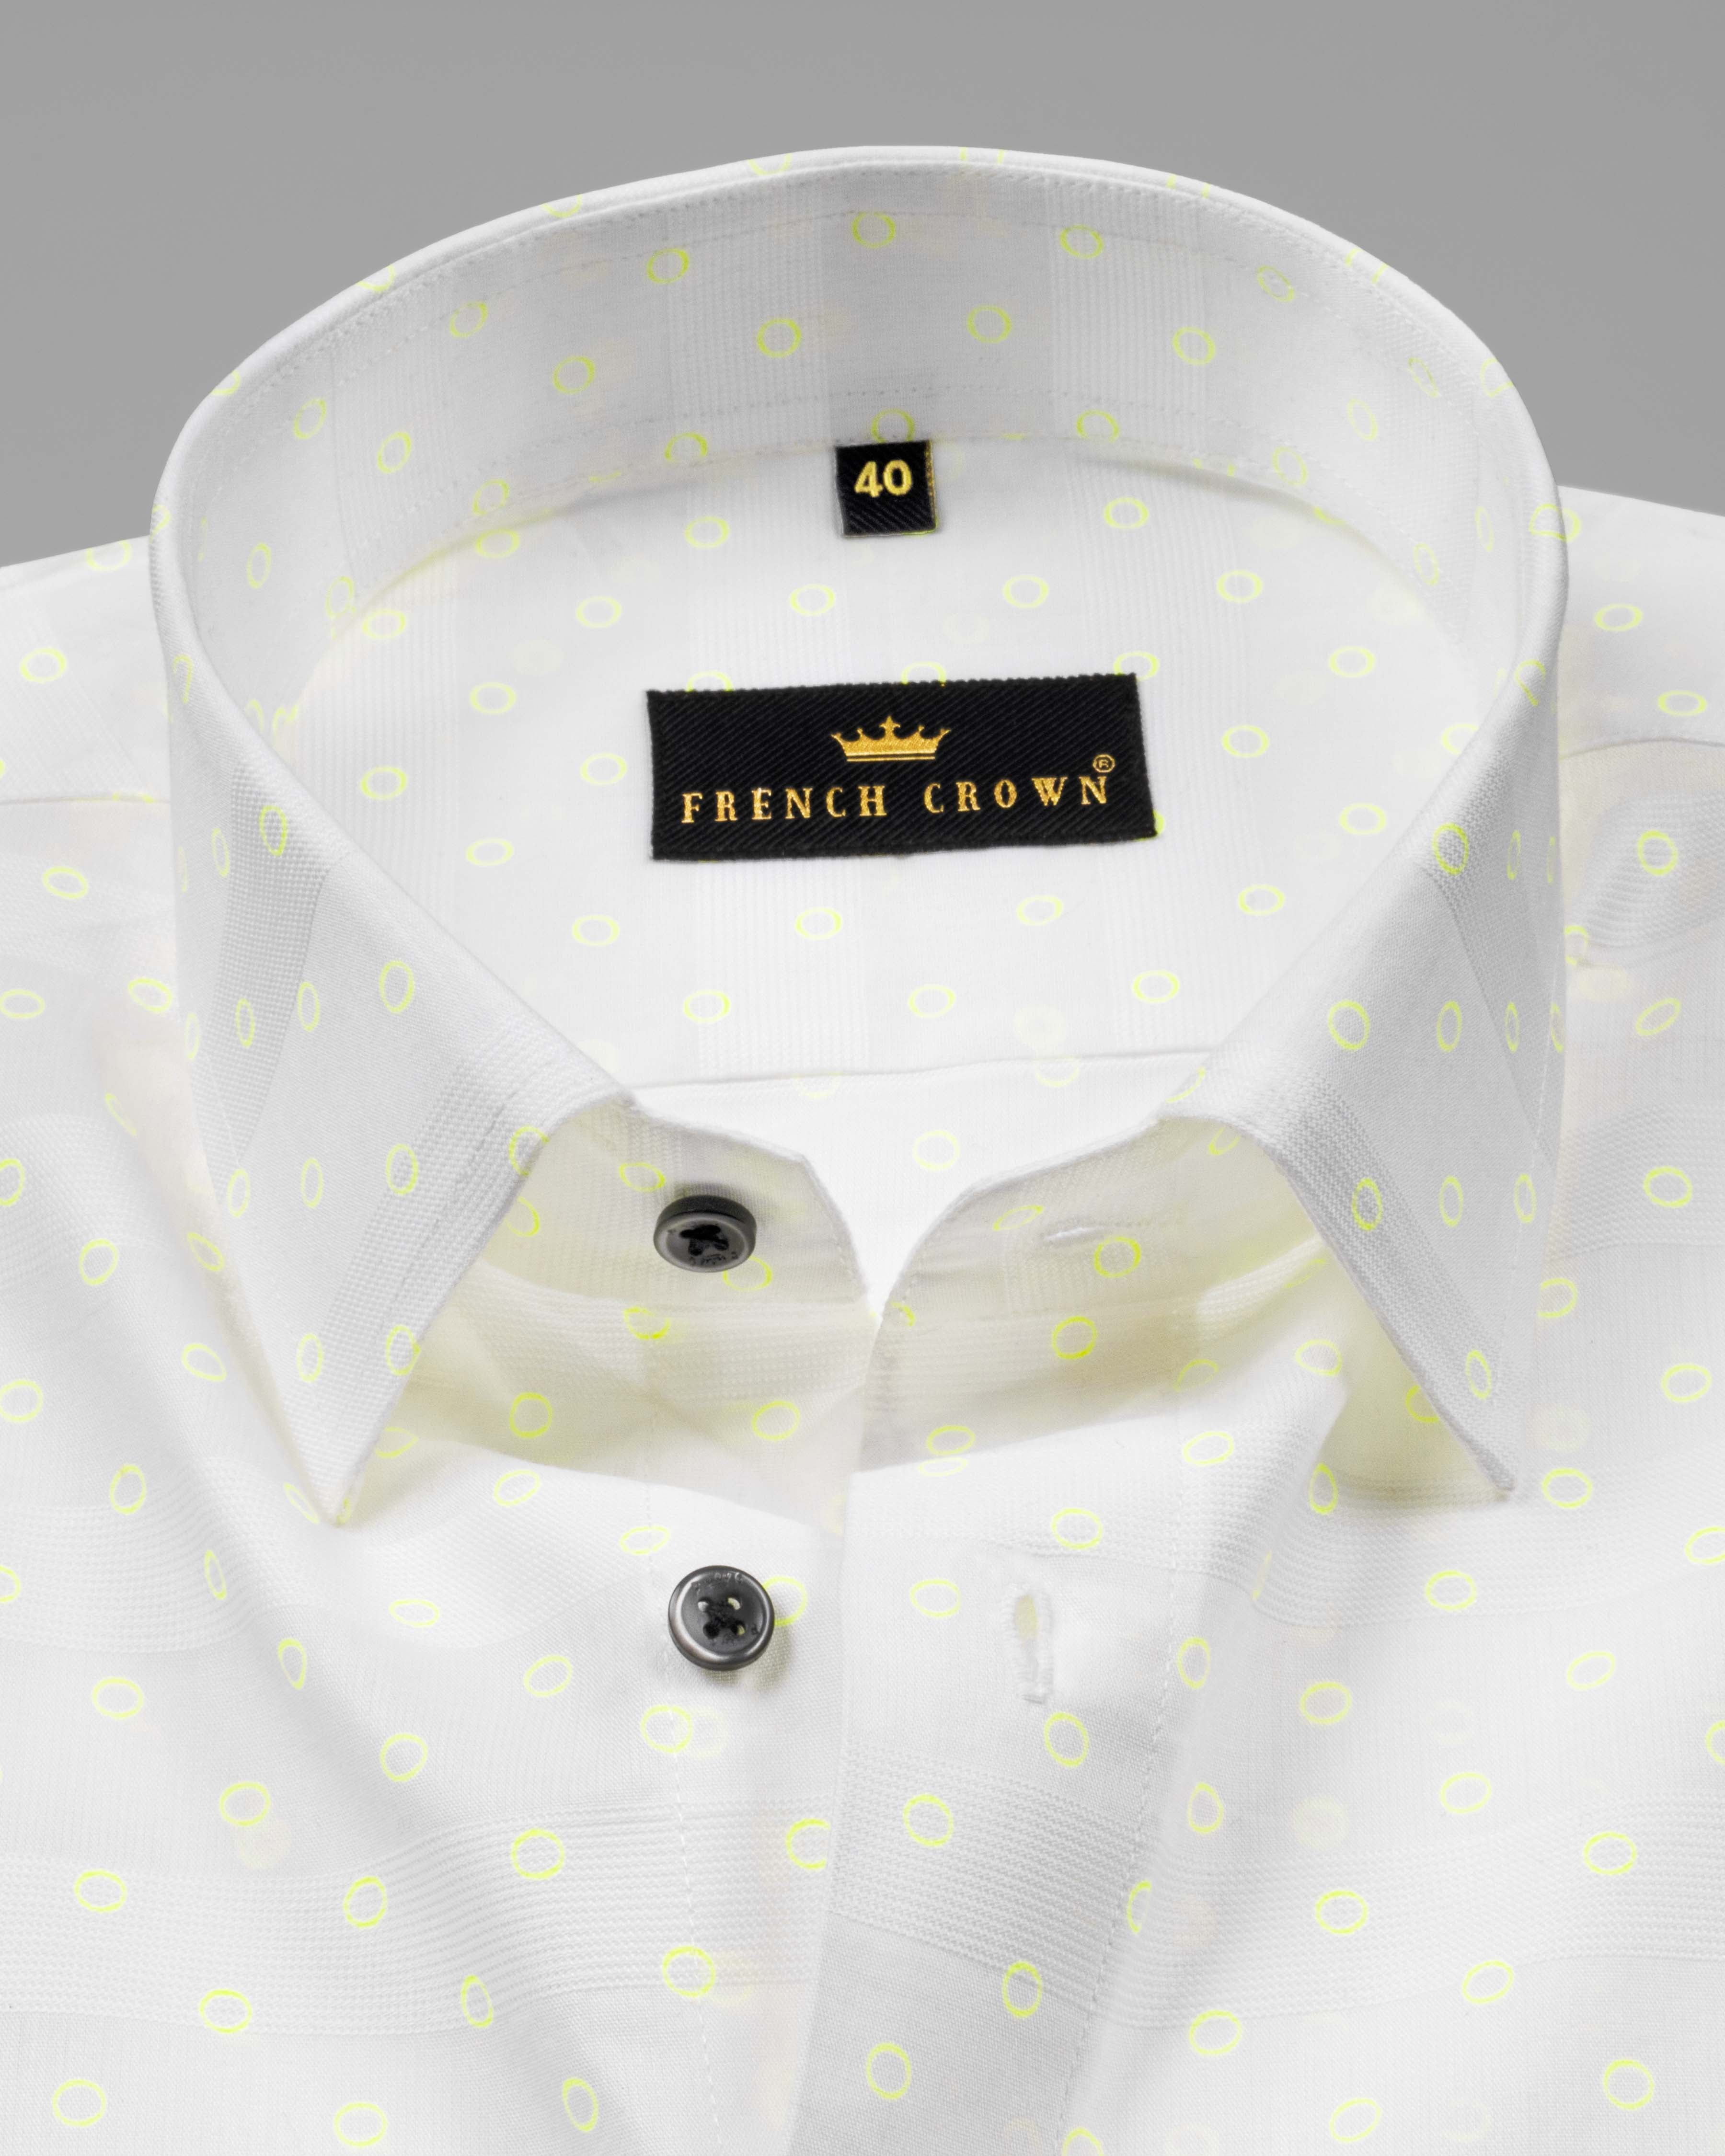 Bright White With Canary Circle Dobby Textured Premium Giza Cotton Shirt 4647-BLK-38, 4647-BLK-H-38, 4647-BLK-39, 4647-BLK-H-39, 4647-BLK-40, 4647-BLK-H-40, 4647-BLK-42, 4647-BLK-H-42, 4647-BLK-44, 4647-BLK-H-44, 4647-BLK-46, 4647-BLK-H-46, 4647-BLK-48, 4647-BLK-H-48, 4647-BLK-50, 4647-BLK-H-50, 4647-BLK-52, 4647-BLK-H-52